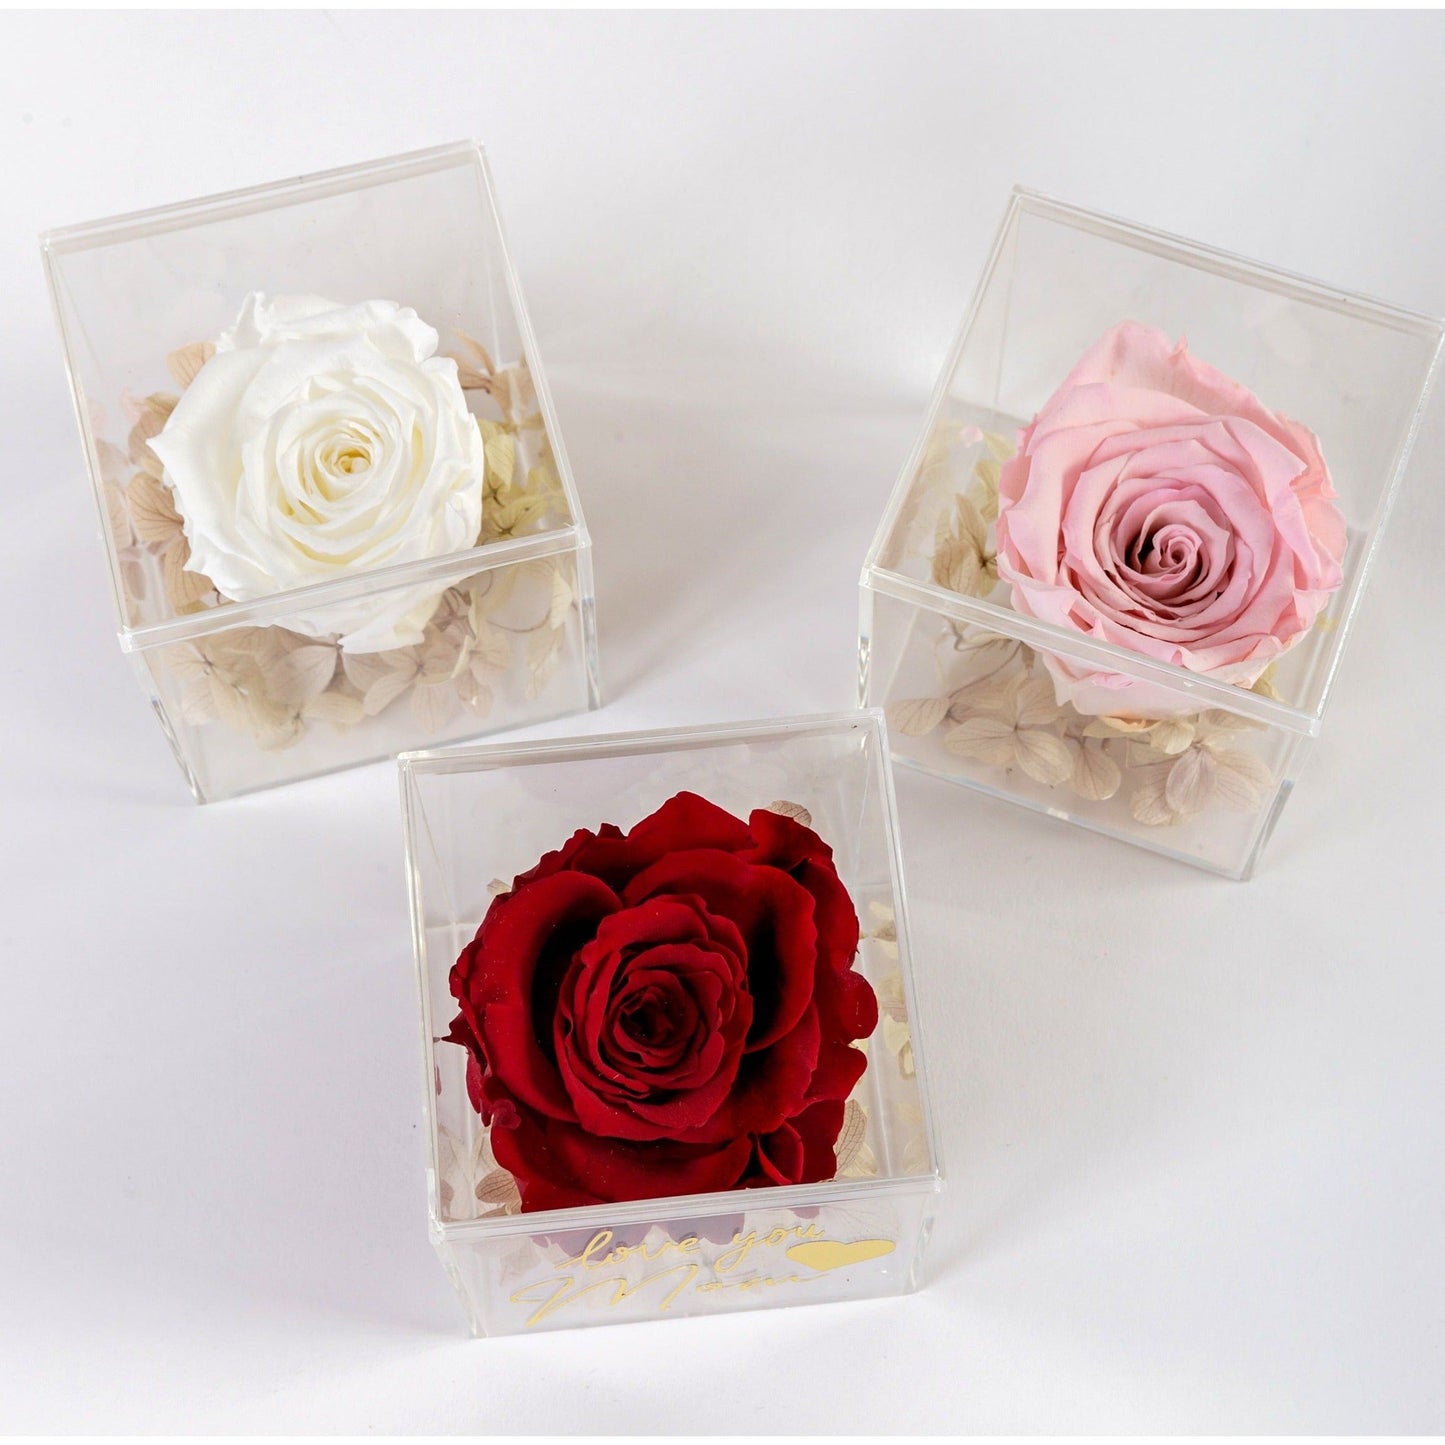 Eternal rose in Acrylic square box